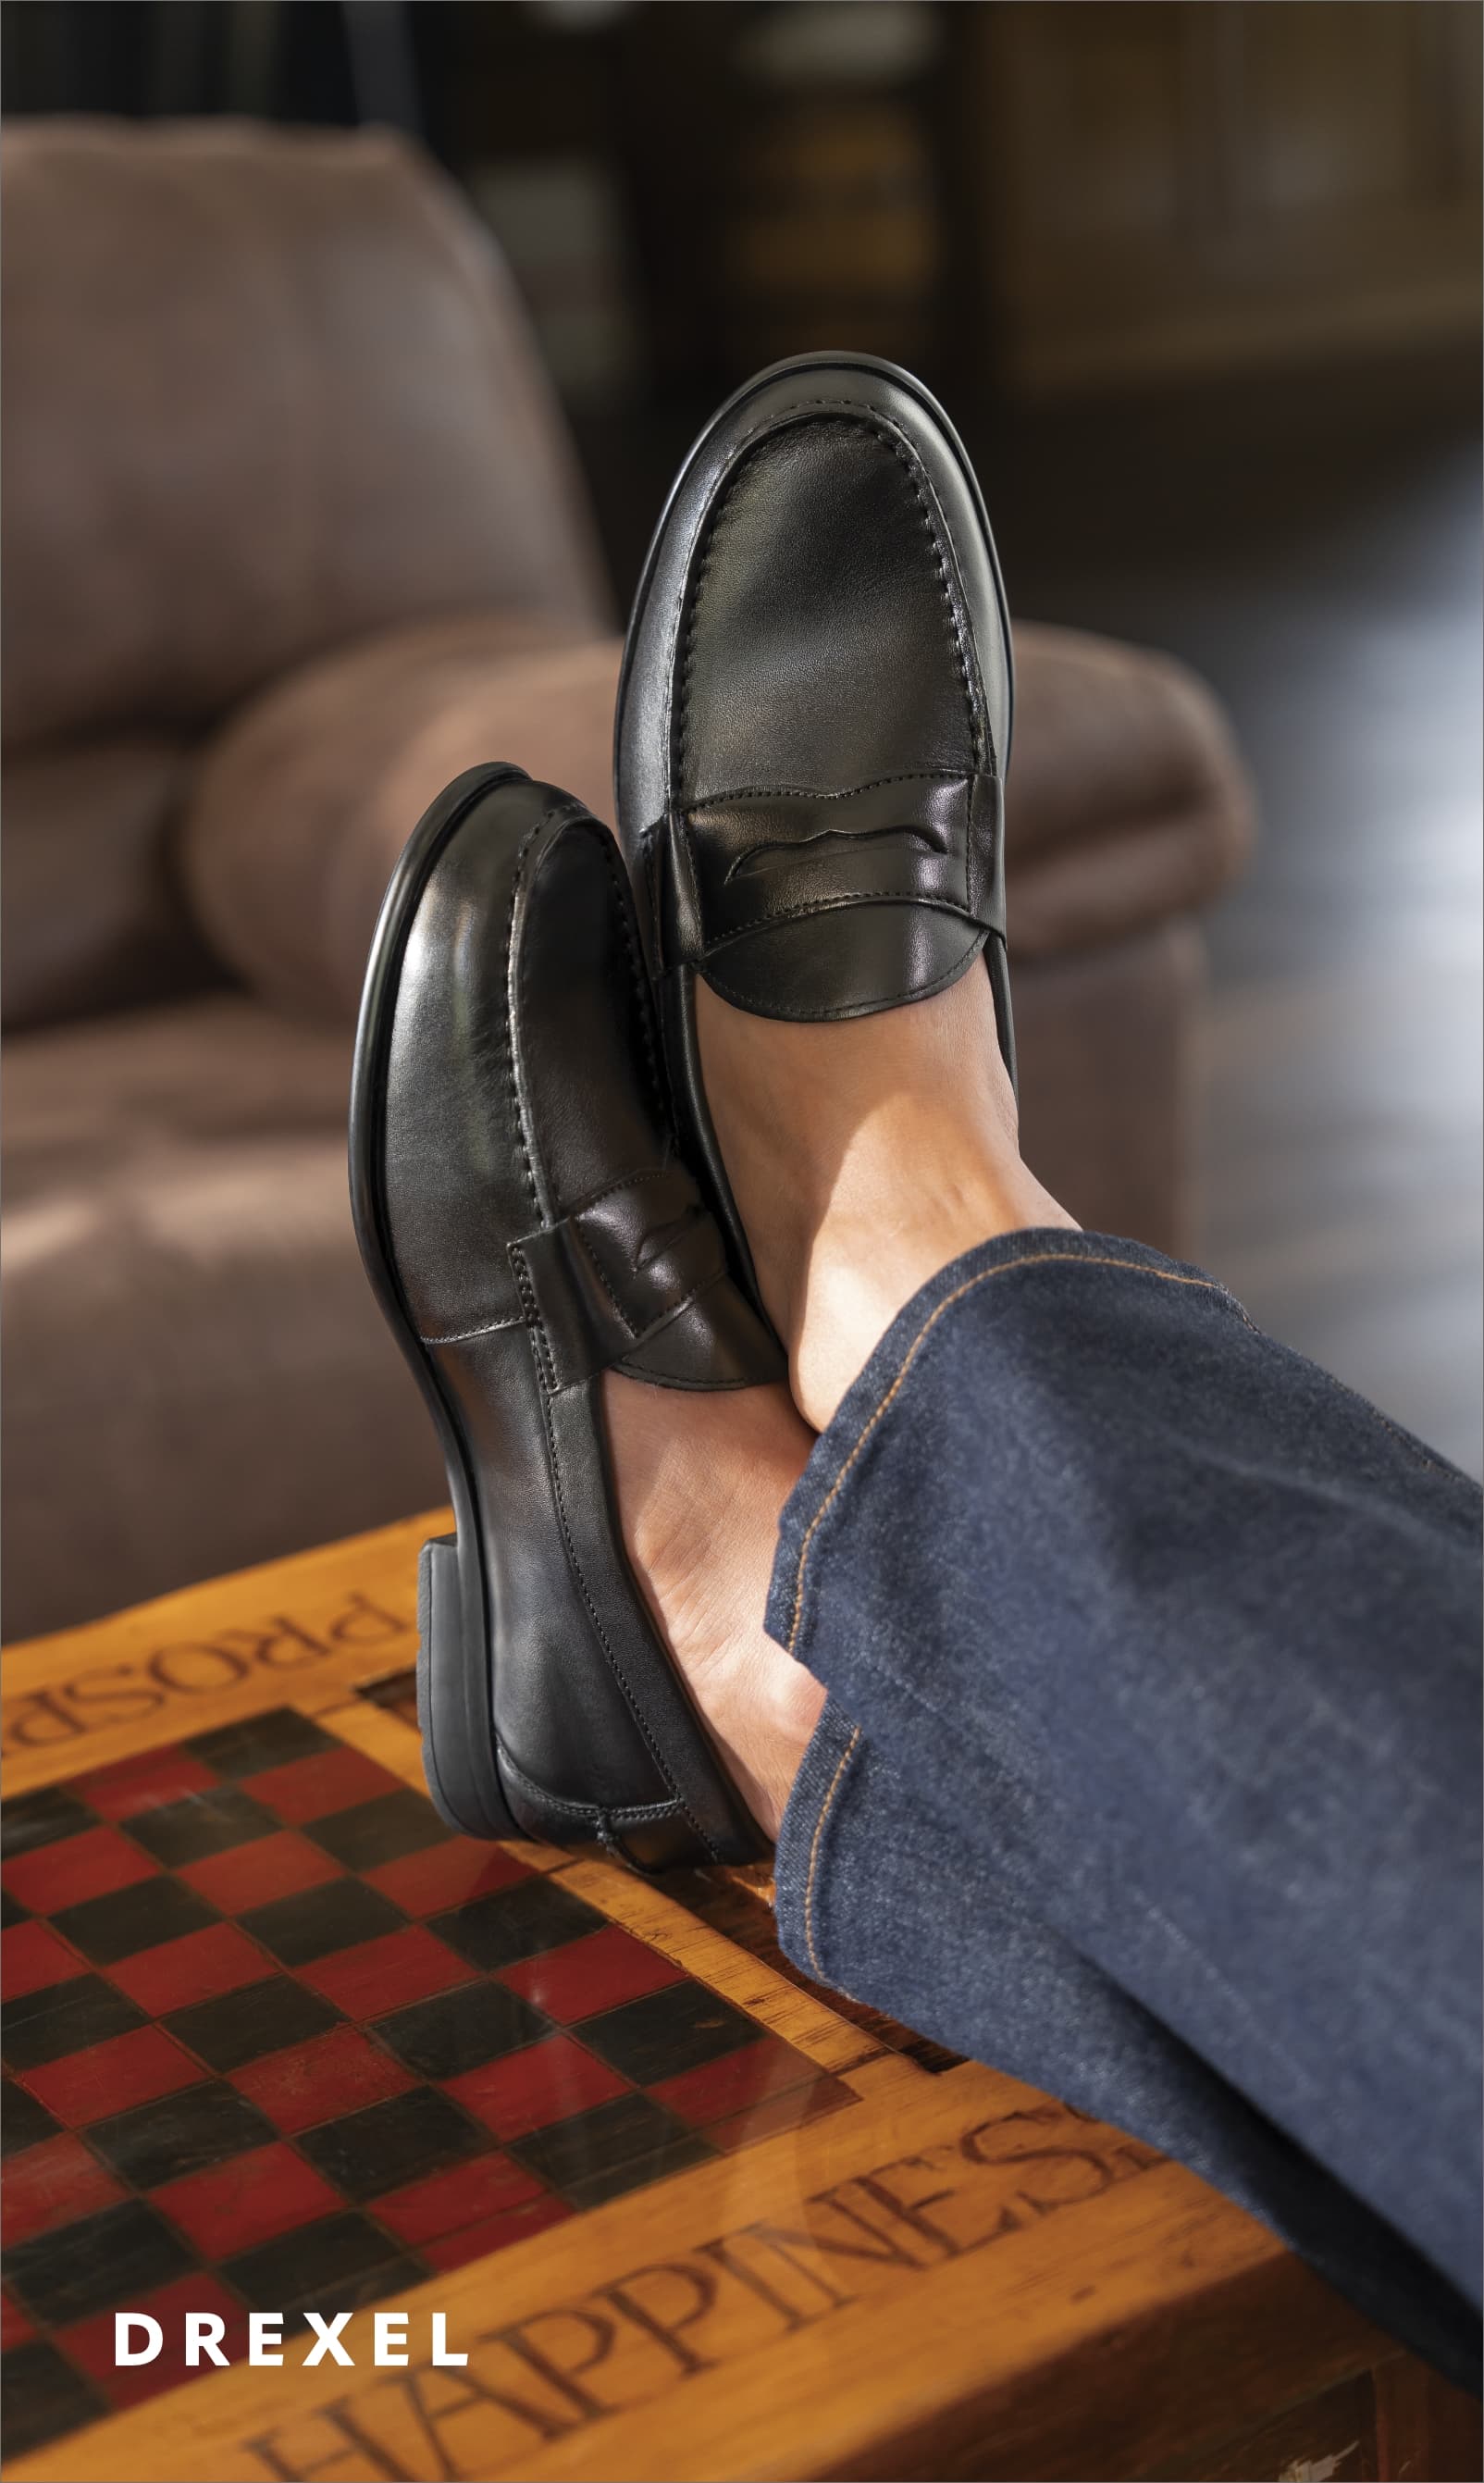 Men's Dress Shoes category. Image features the Drexel penny loafer. 